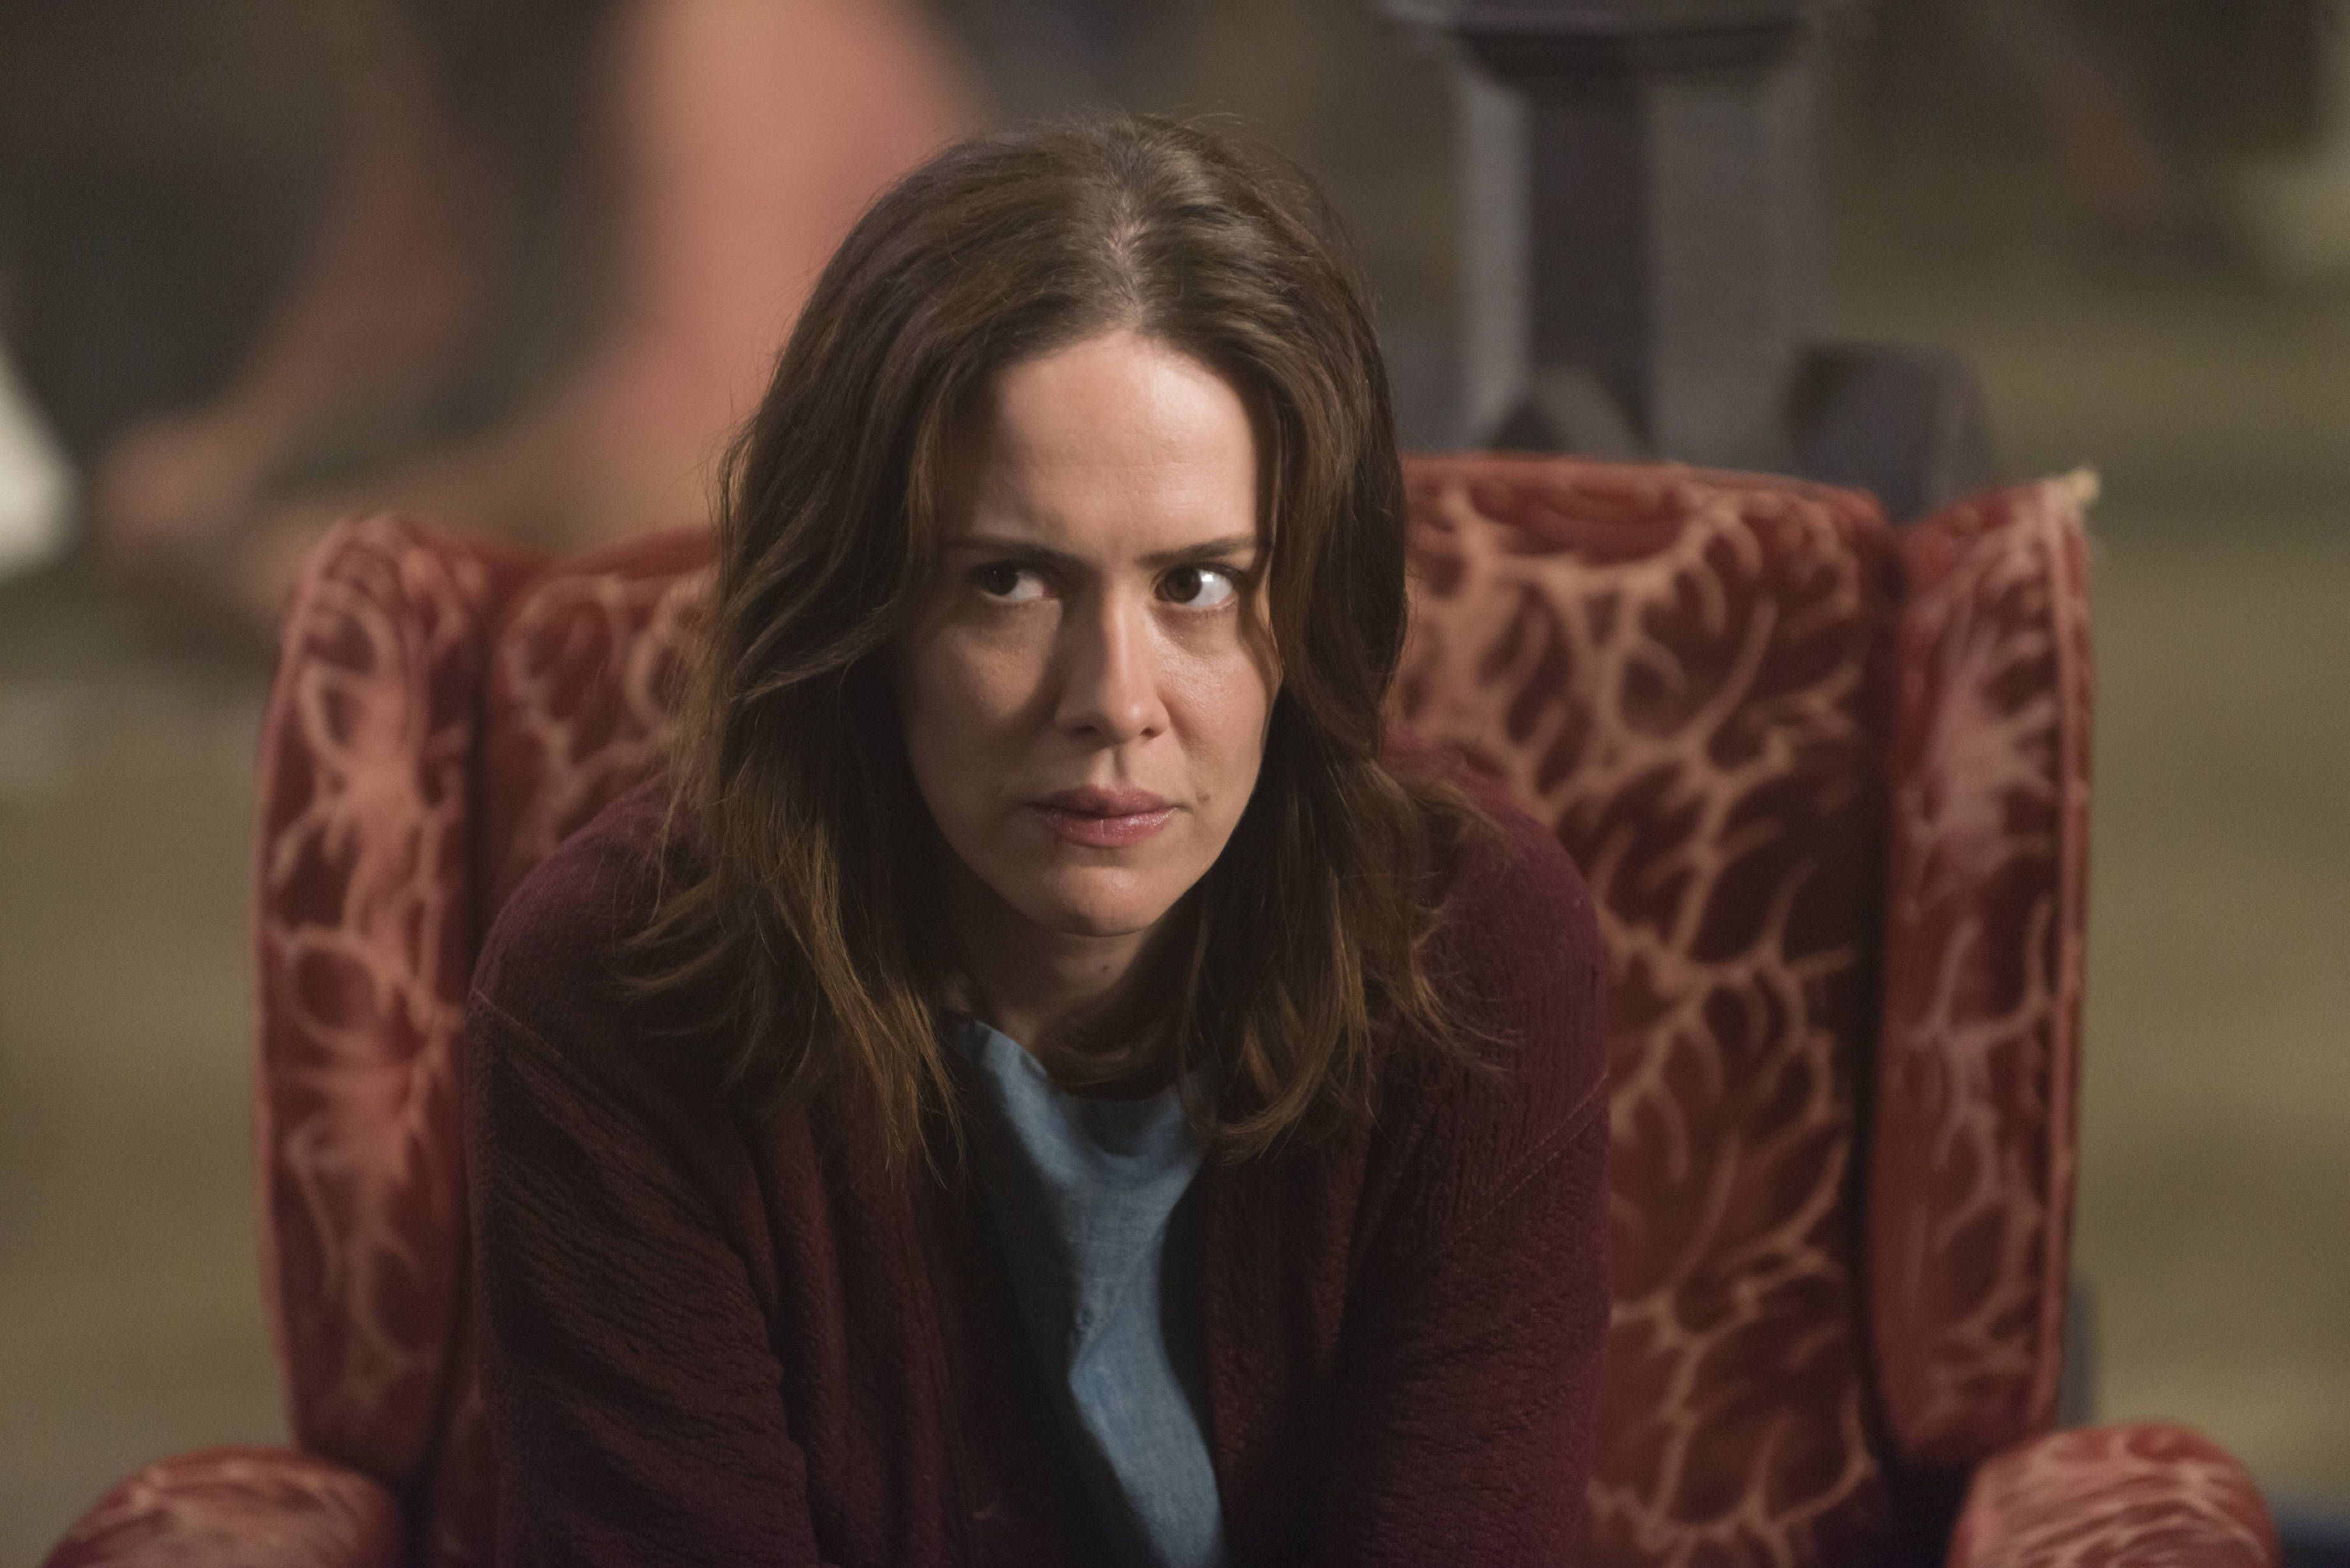 Paulson’s nightmarish portrayal of reporter Lana Winters made it clear that there is no ‘American Horror Story’ without her